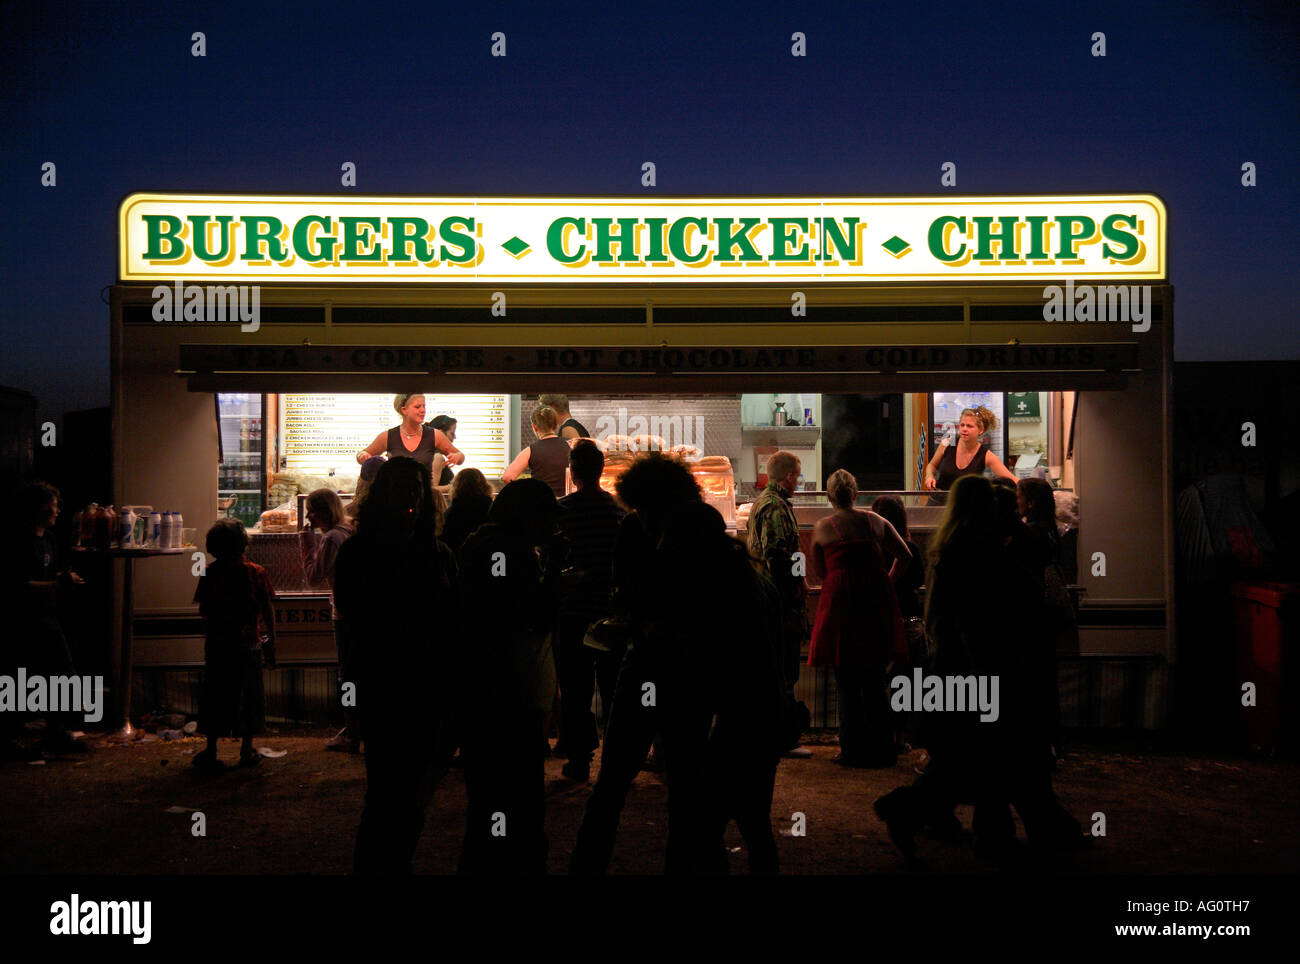 Burgers, chicken and chips van at night. Guilfest  Music Festival, Guildford, Surrey, England Stock Photo